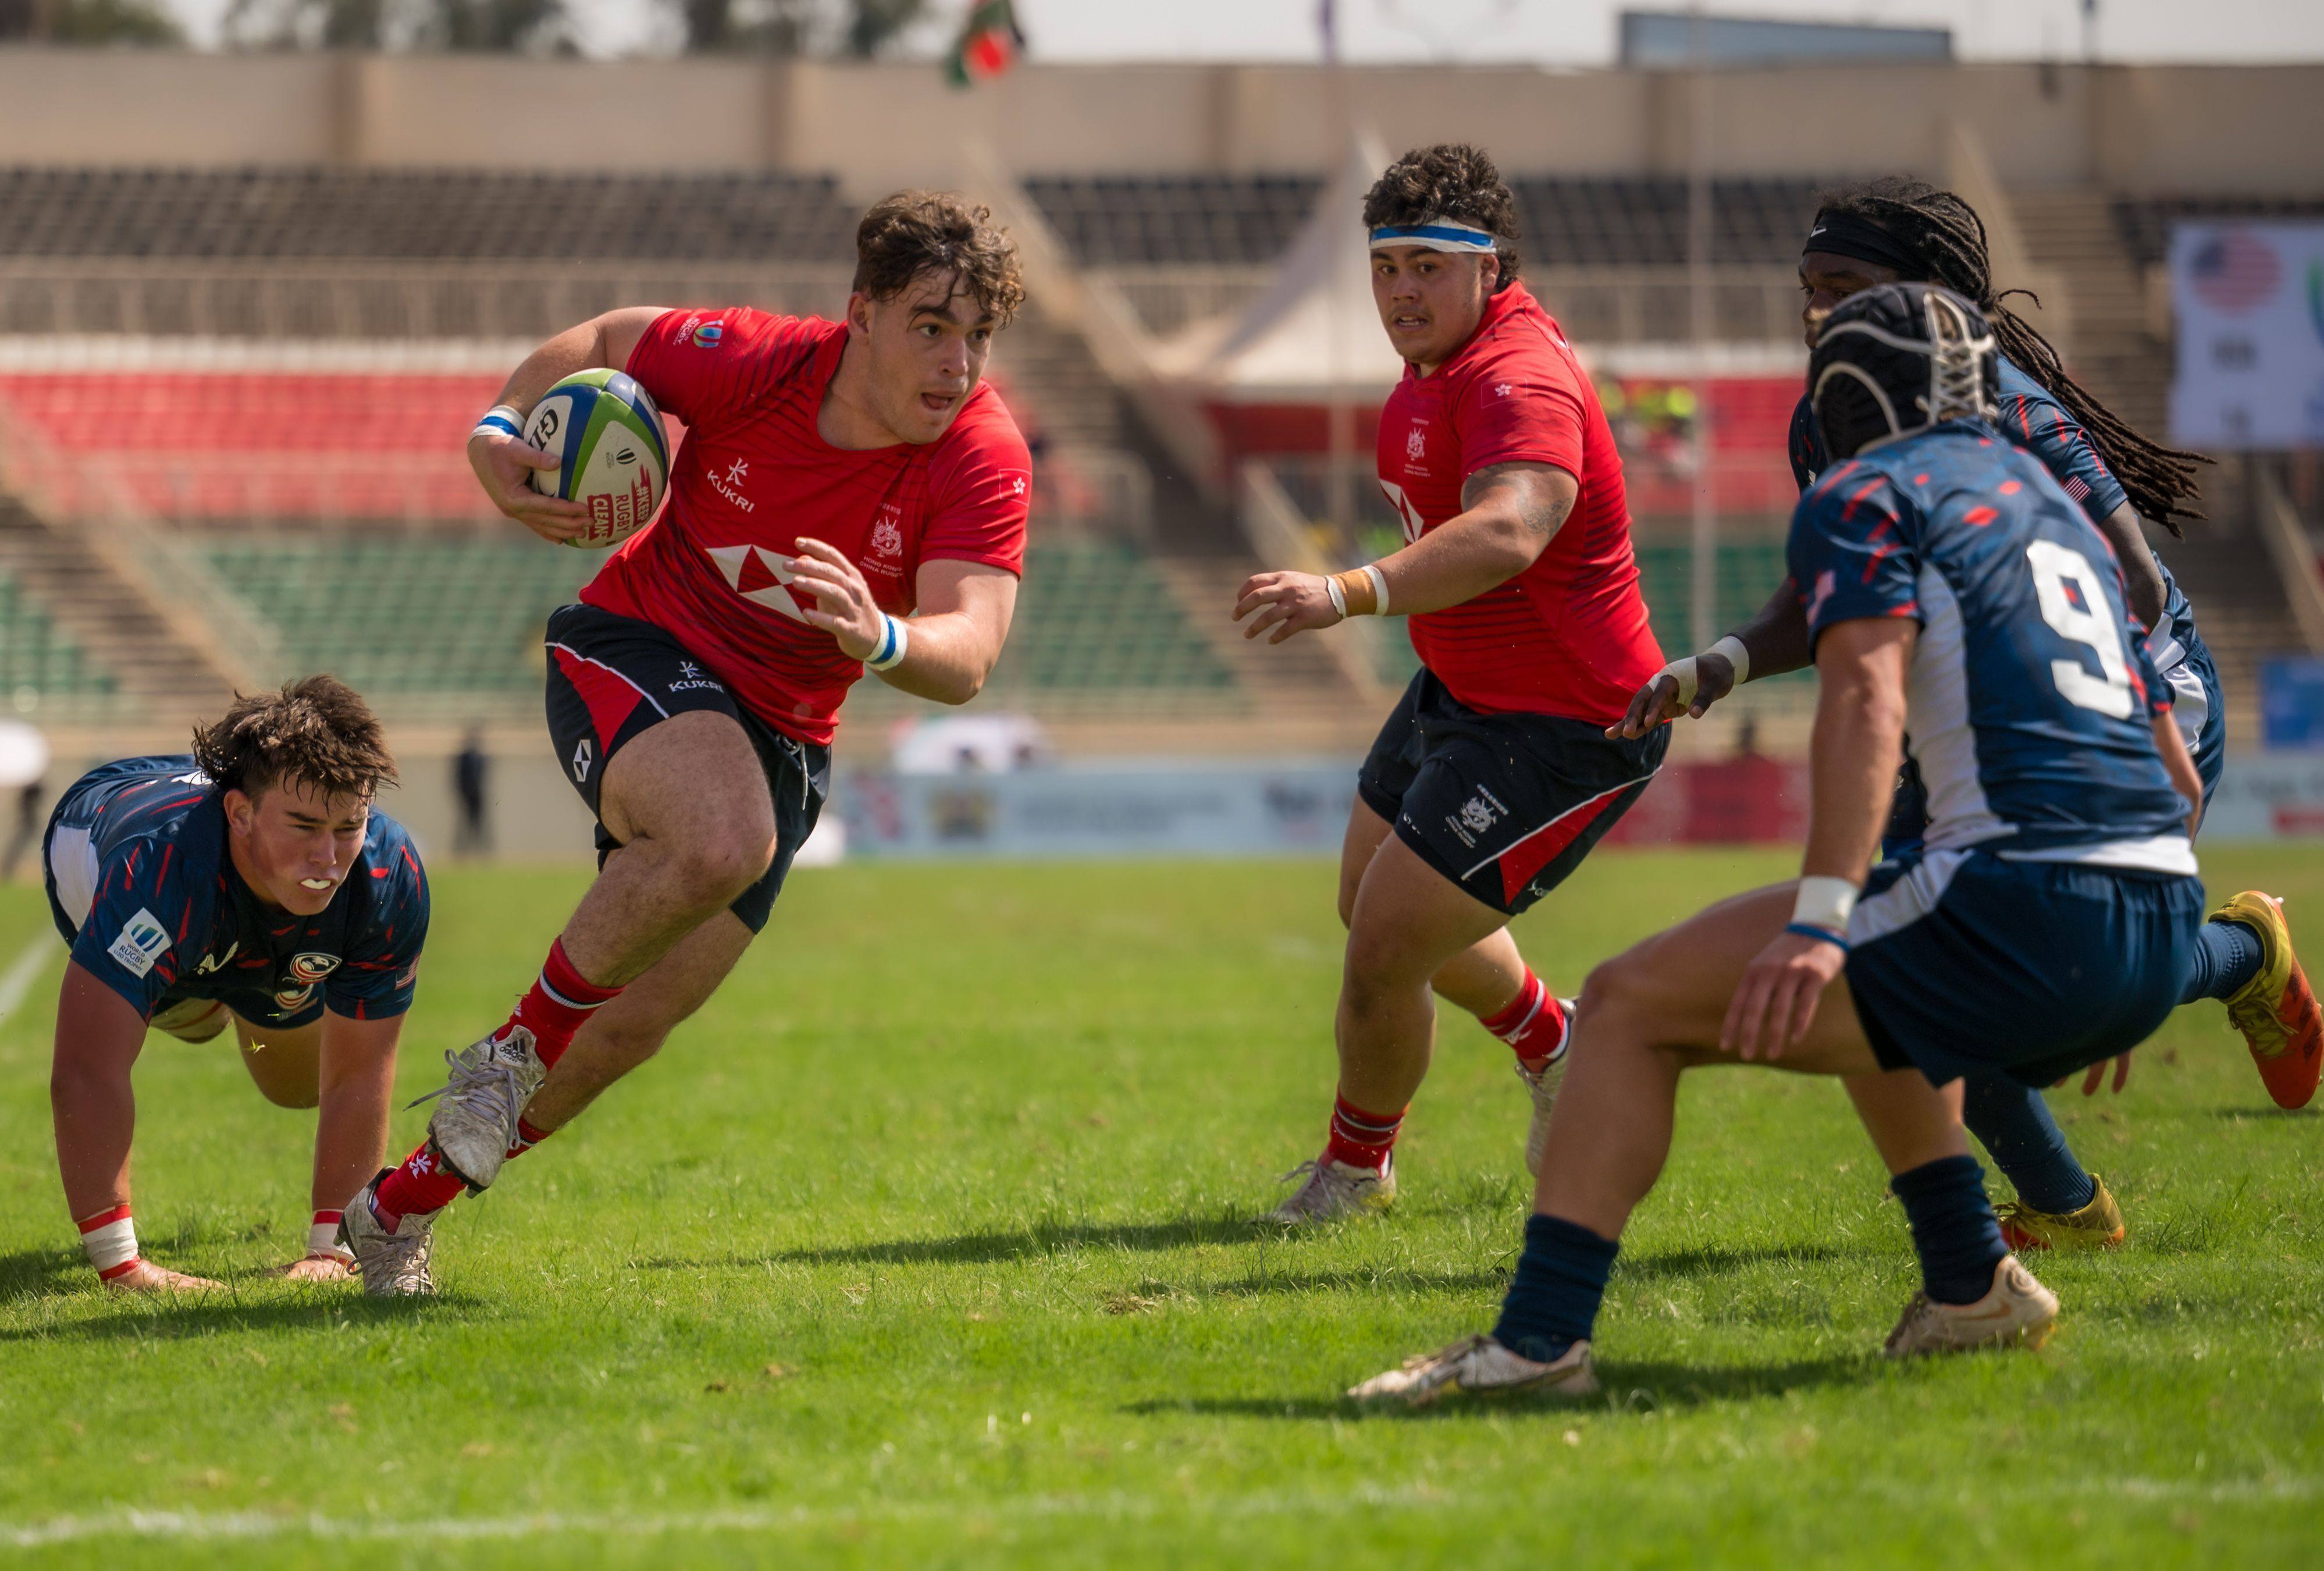 Hong Kong hooker Dewi Simons scored his side’s first try against the USA. Photo: World Rugby